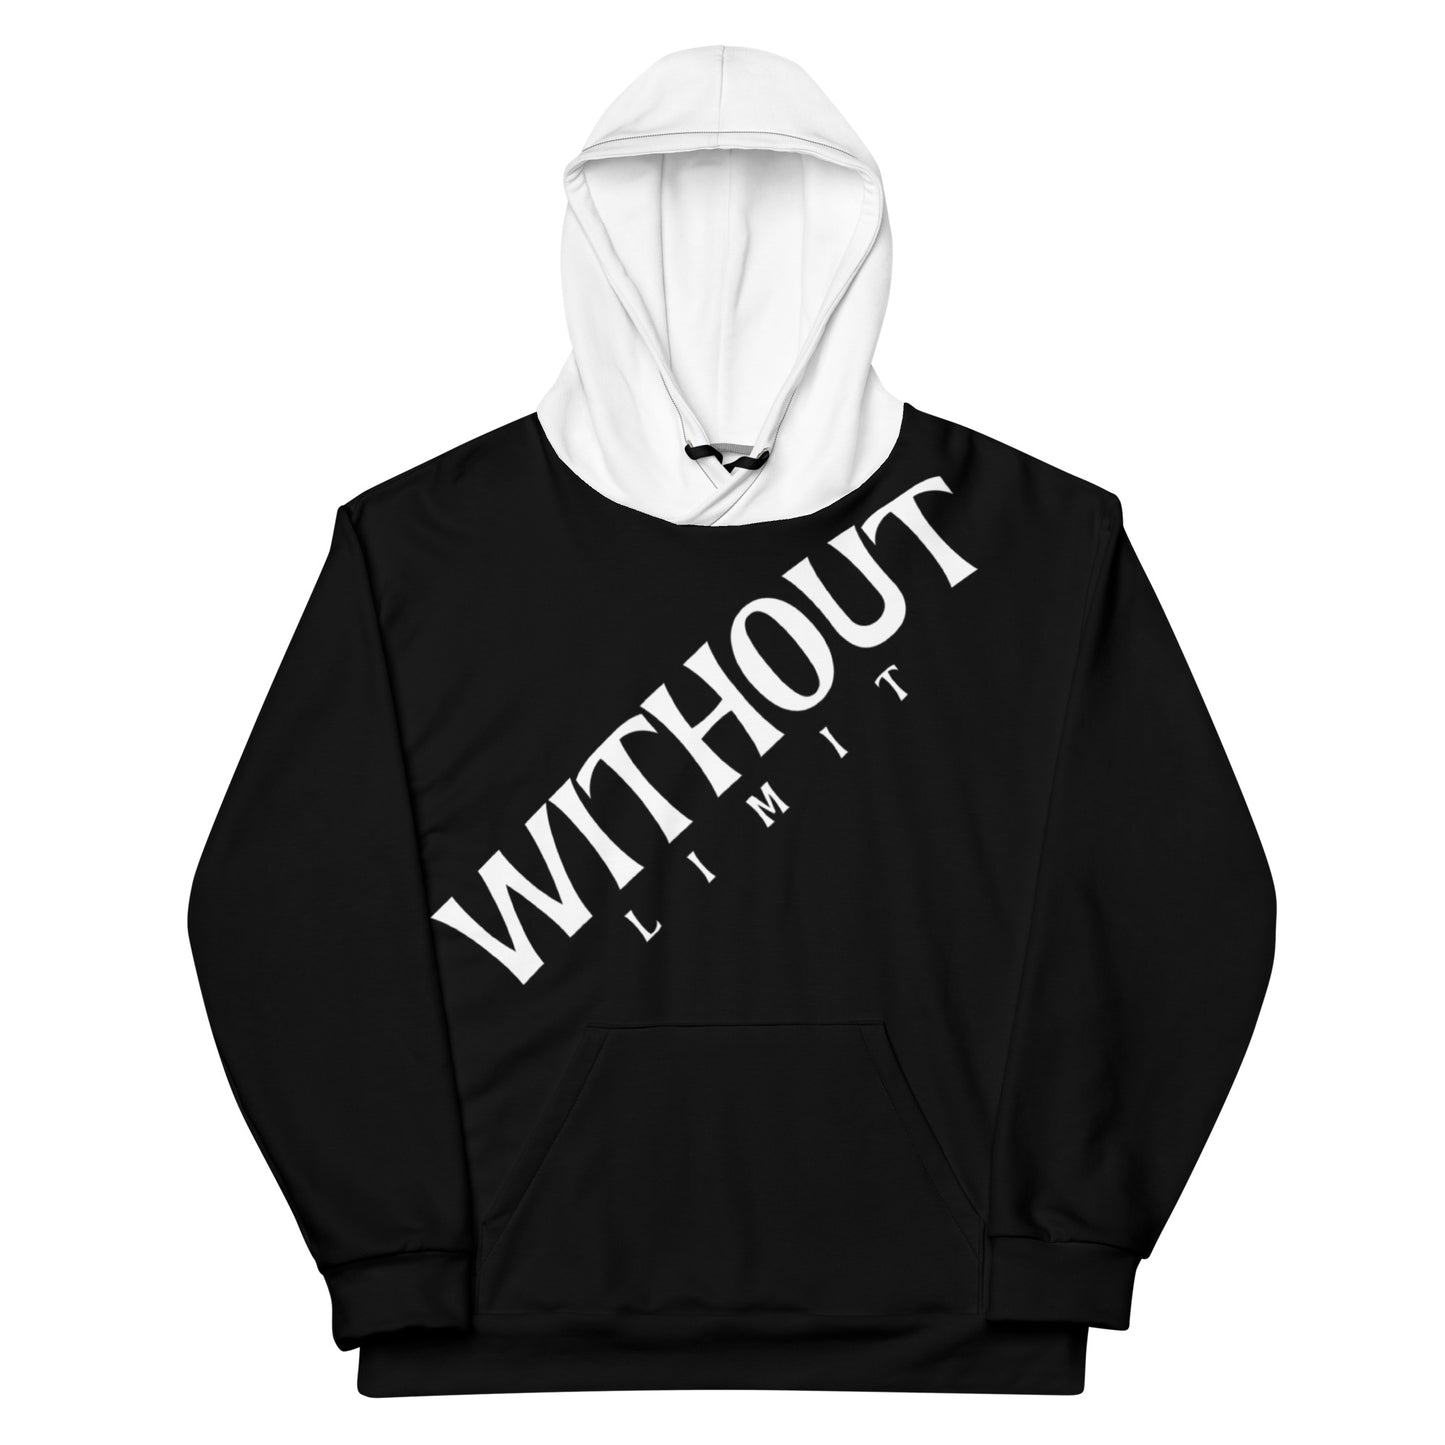 Without Limit Black/white combo hoodie